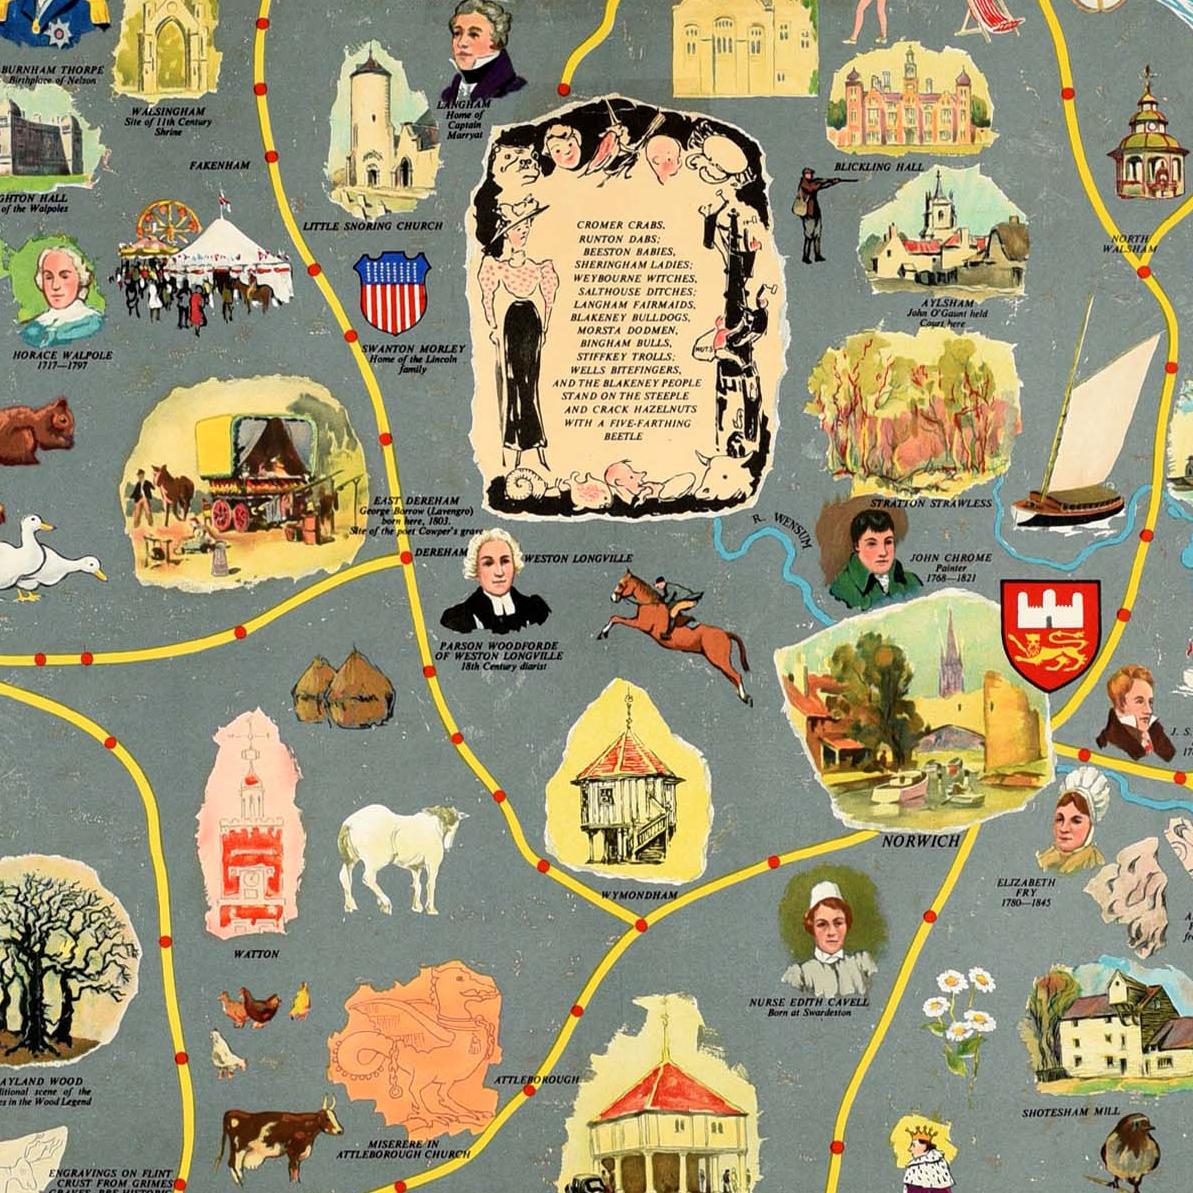 Original vintage travel advertising poster - A Map of Norfolk published by British Railways - featuring various colourful historical, sporting and cultural images with description text, including sailing boats, farm animals, ruins and notable people